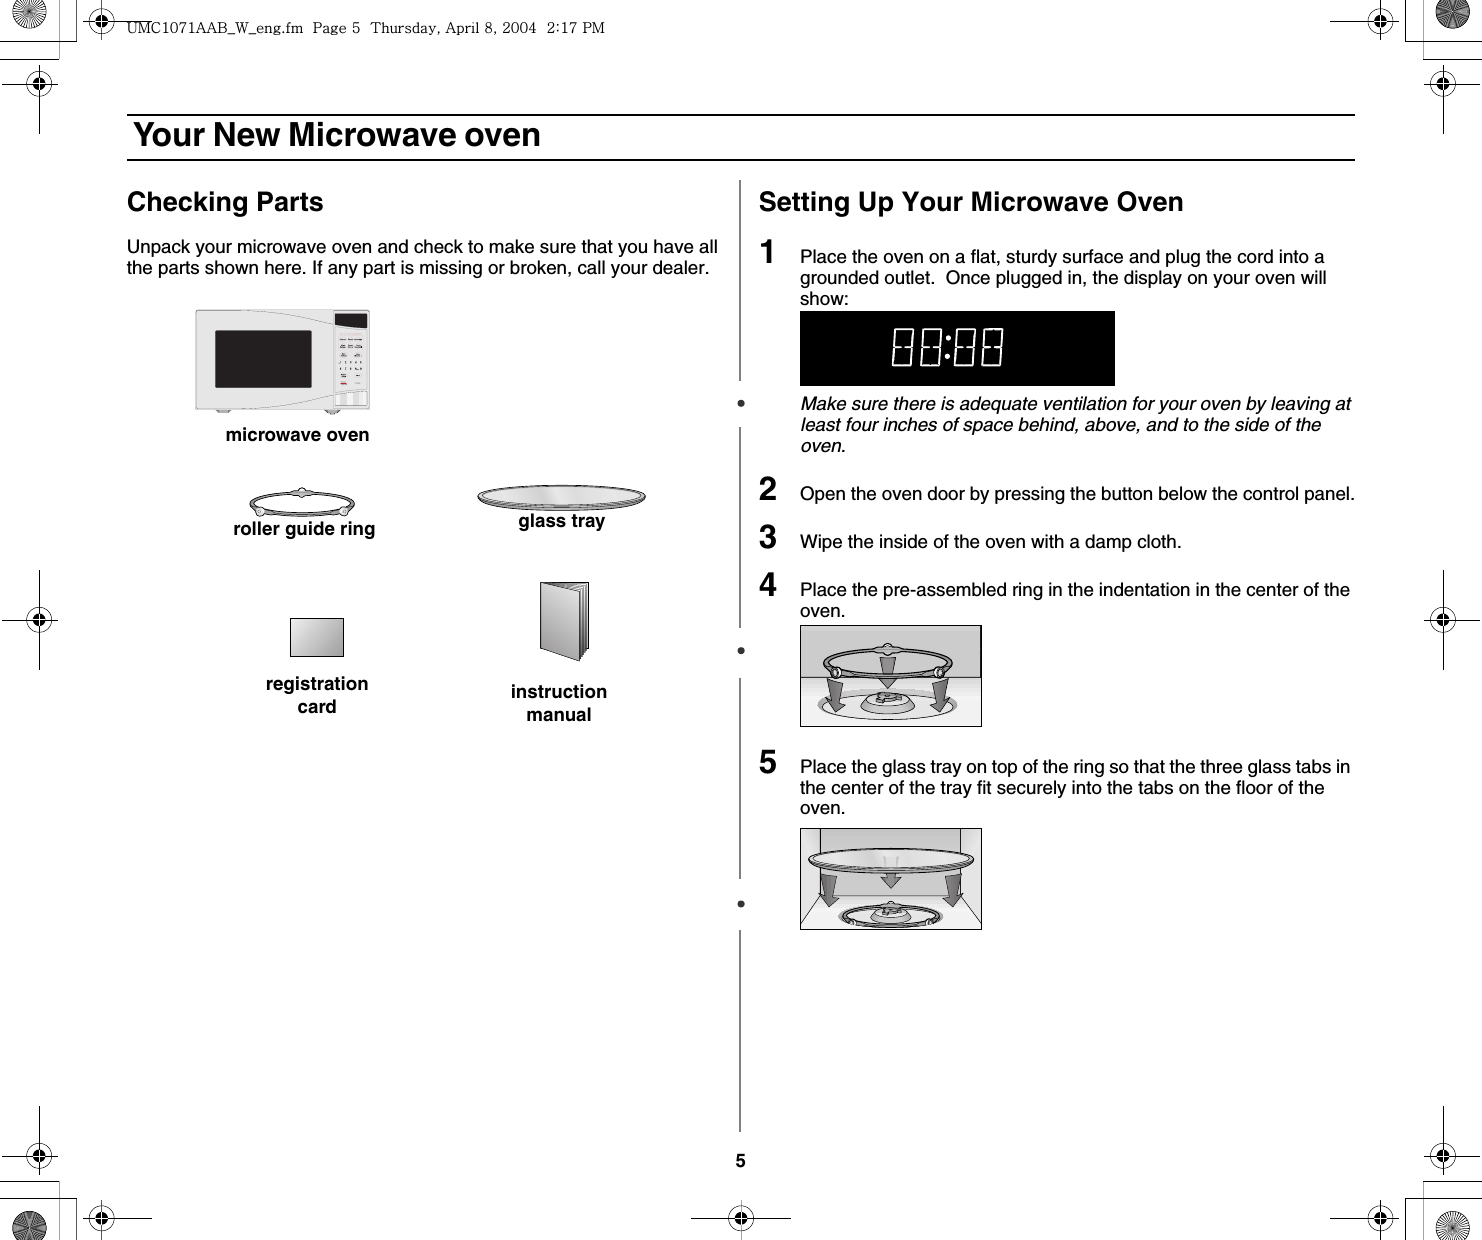 5 Your New Microwave ovenChecking PartsUnpack your microwave oven and check to make sure that you have all the parts shown here. If any part is missing or broken, call your dealer.Setting Up Your Microwave Oven1Place the oven on a flat, sturdy surface and plug the cord into a grounded outlet.  Once plugged in, the display on your oven will show:Make sure there is adequate ventilation for your oven by leaving at least four inches of space behind, above, and to the side of the oven. 2Open the oven door by pressing the button below the control panel.3Wipe the inside of the oven with a damp cloth.4Place the pre-assembled ring in the indentation in the center of the oven.5Place the glass tray on top of the ring so that the three glass tabs in the center of the tray fit securely into the tabs on the floor of the oven.microwave ovenglass trayroller guide ringinstruction manualregistration card|tjXW^Xhhi~UGGwG\GG{SGhG_SGYWW[GGYaX^Gwt